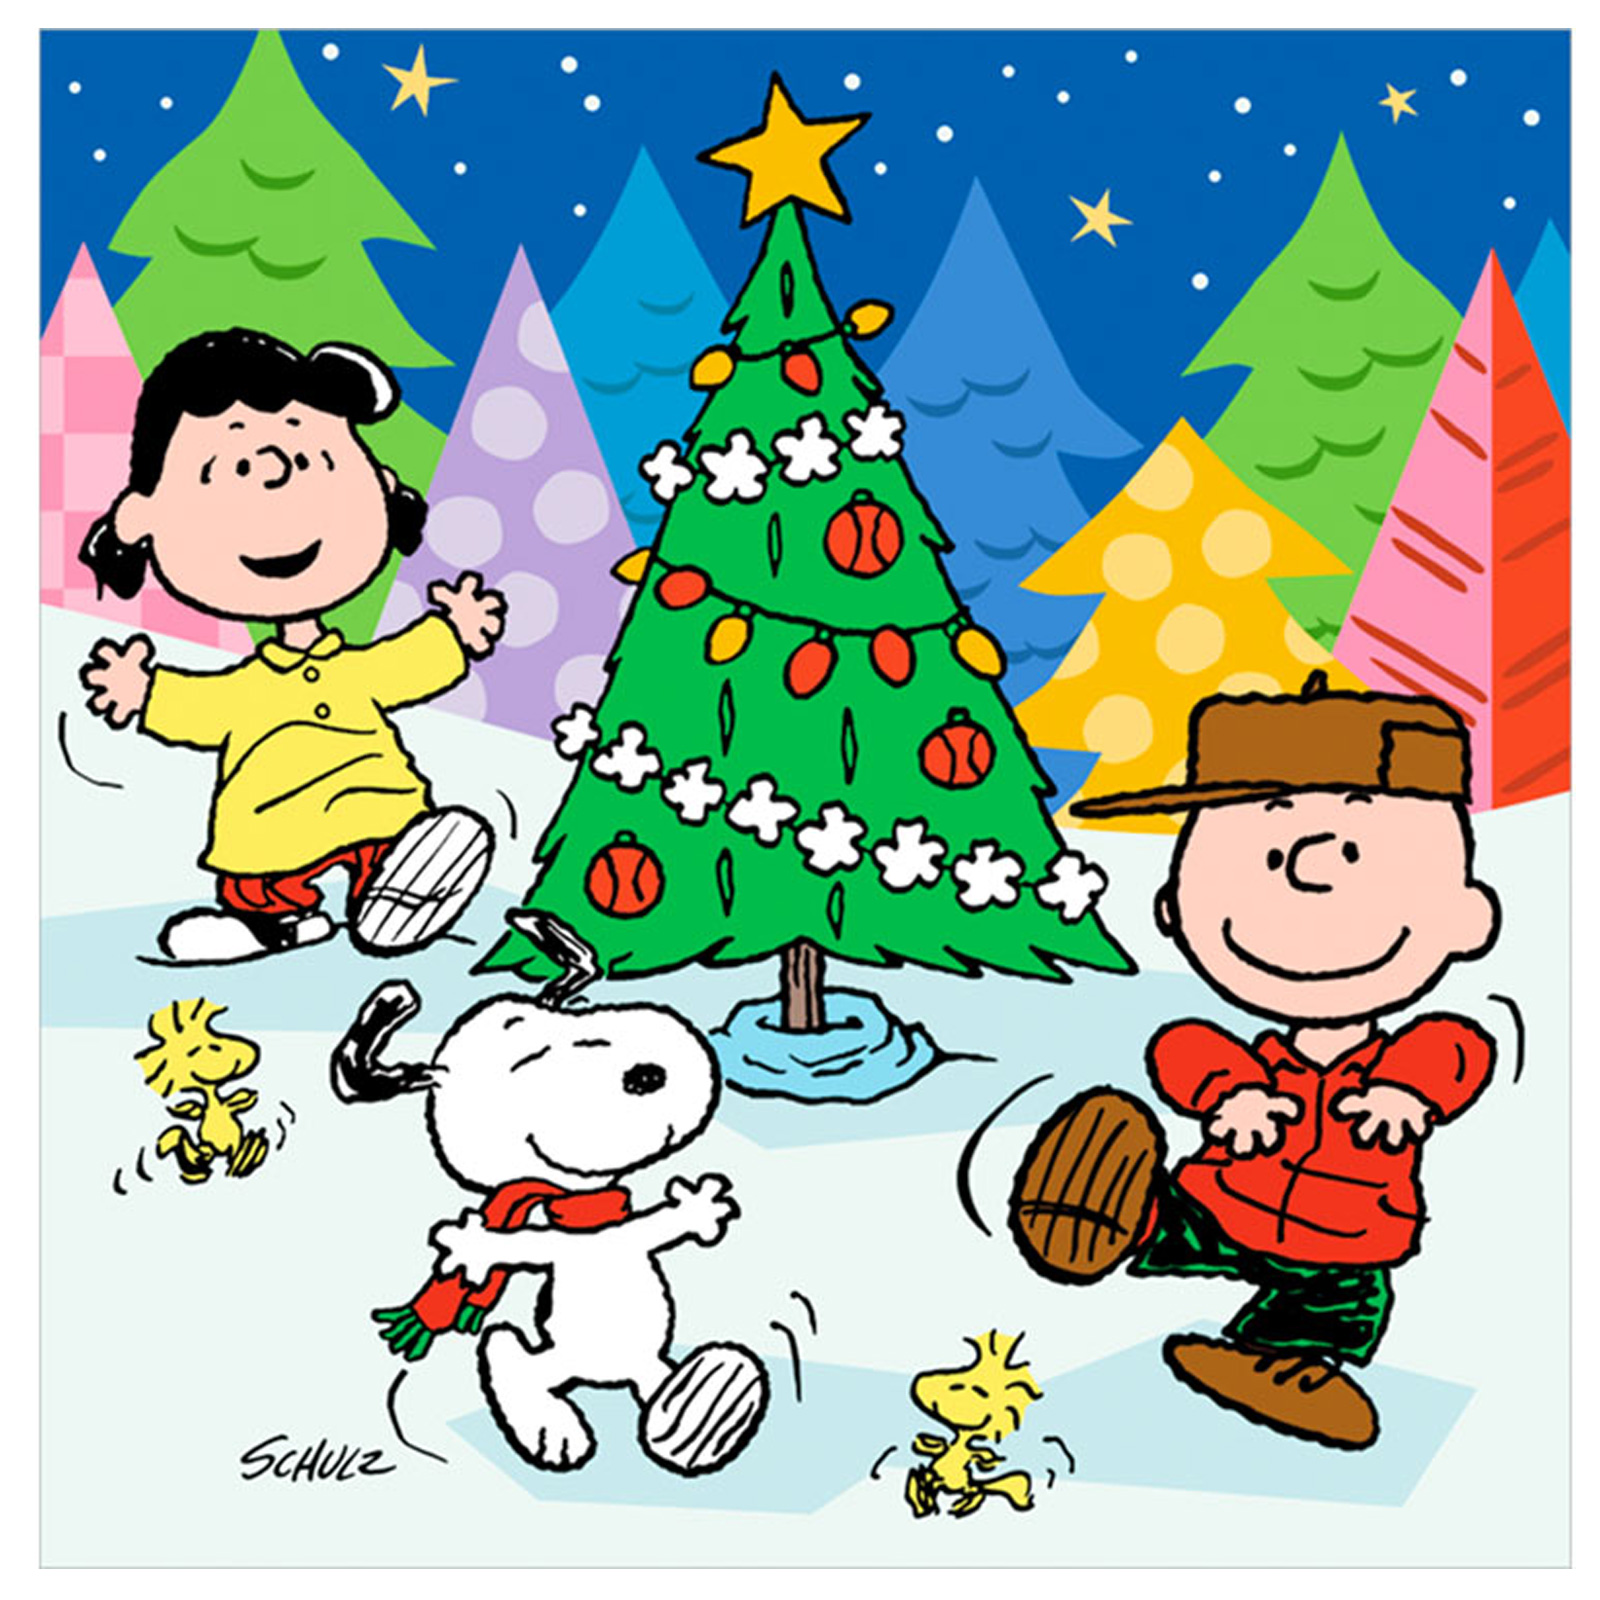 CHARLIE BROWN peanuts comics snoopy christmas by wallpaperupcom